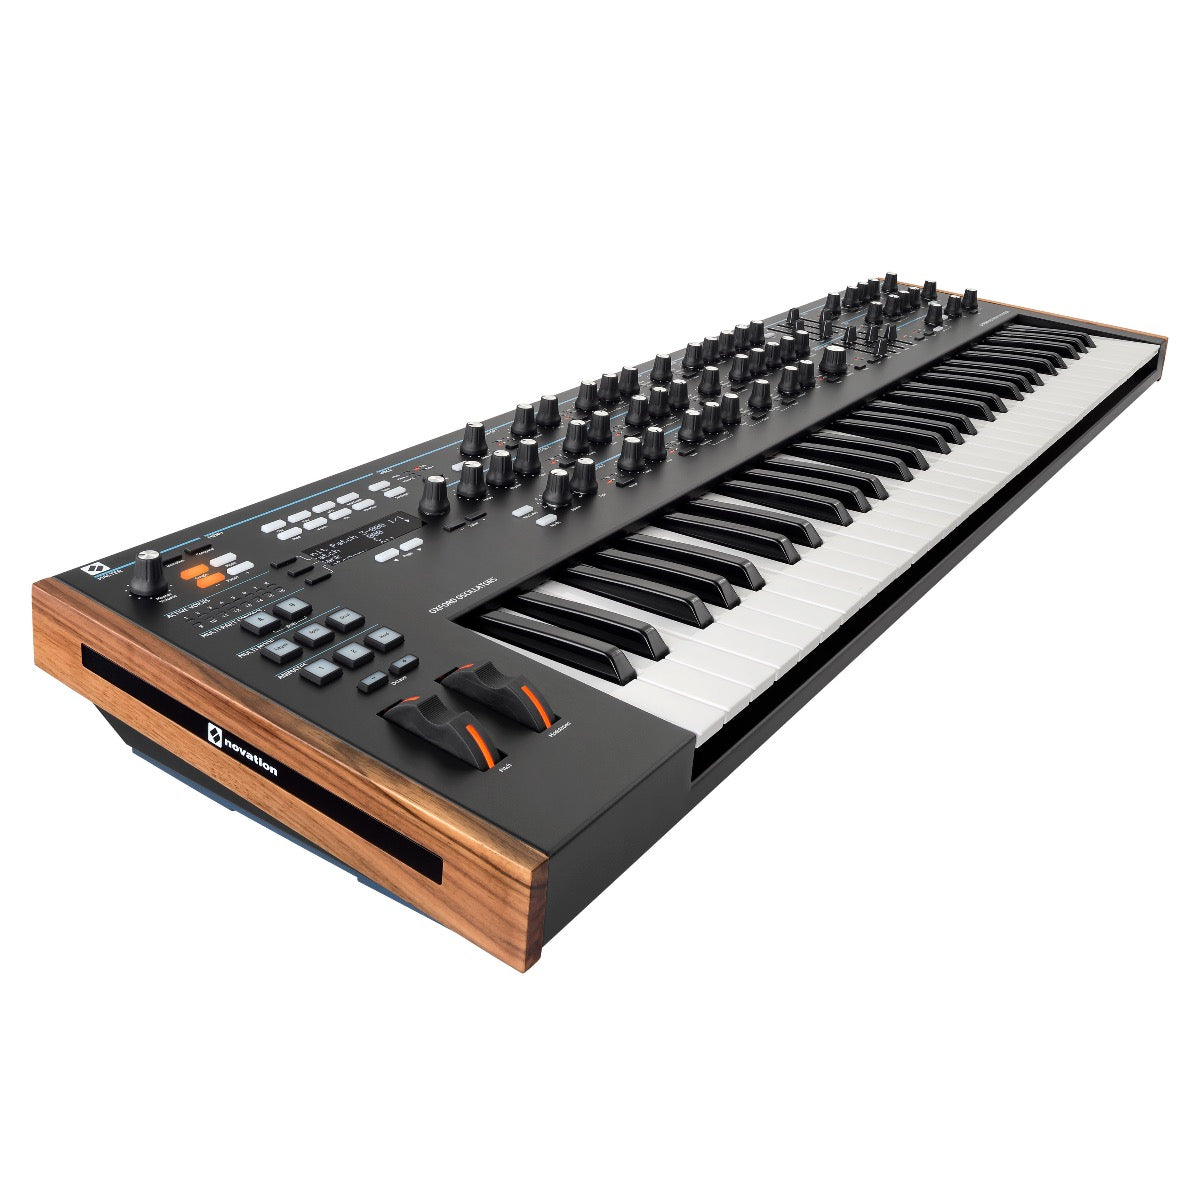 3/4 view of Novation Summit 16-Voice Polyphonic Keyboard Synthesizer showing top, left side and front